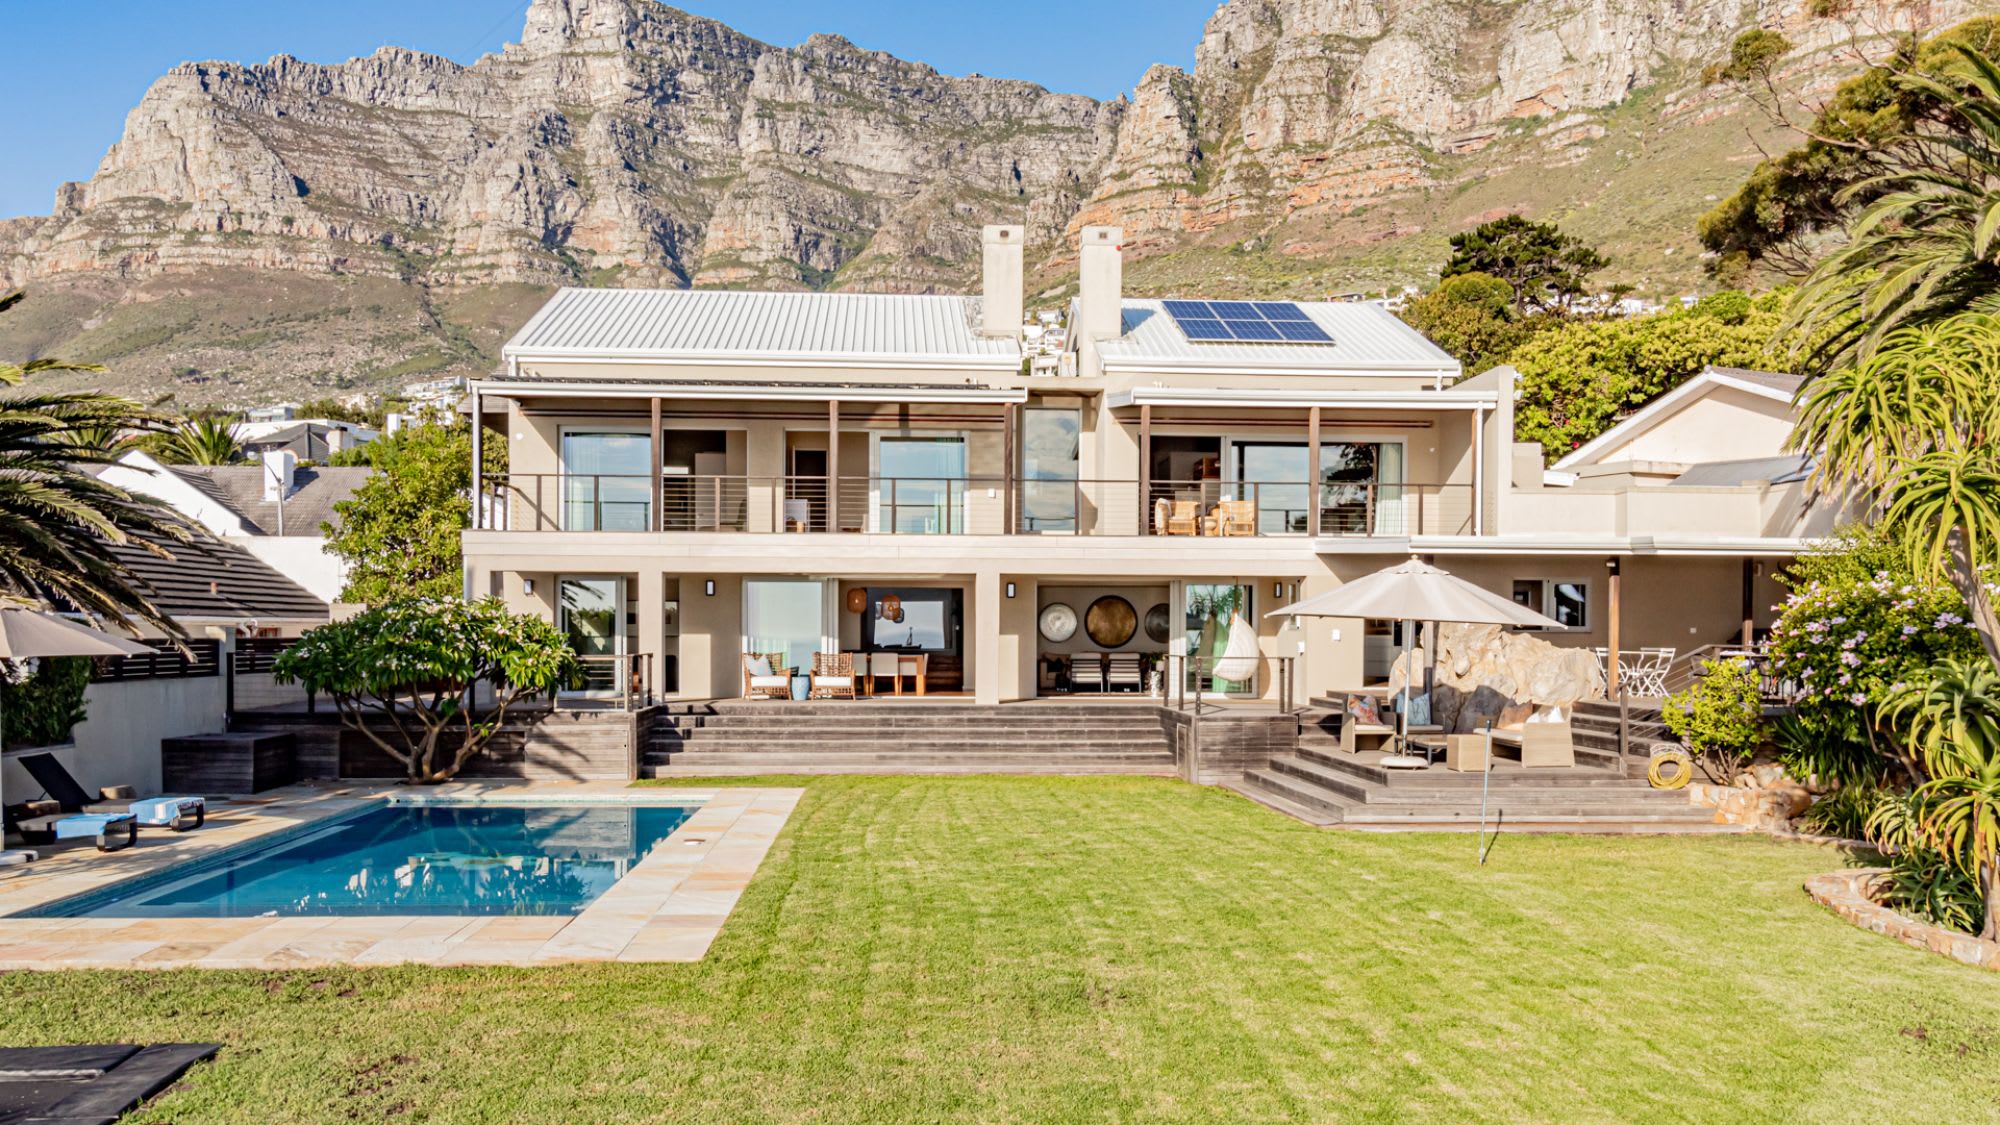 Similar Property Incredible Family Villa in Camps Bay with Private Pool and Large Garden Riomar